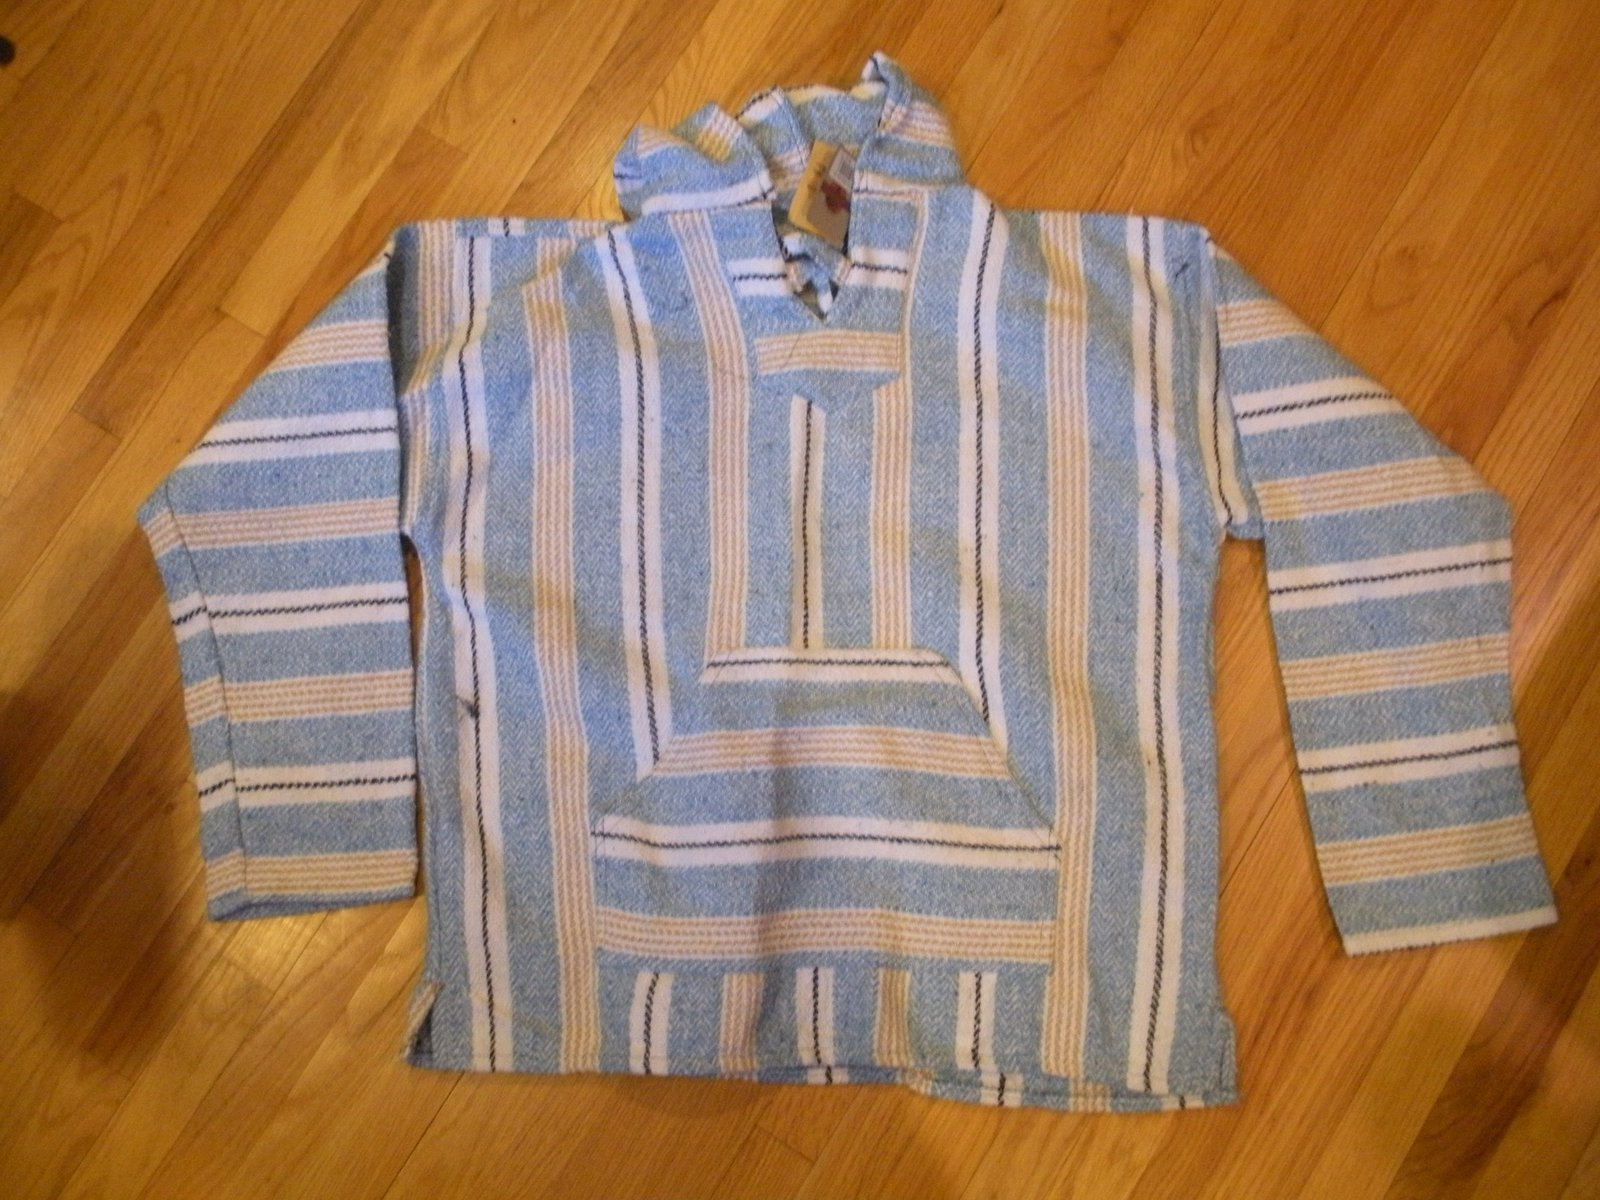 Drug rugs for sale - 1 of 2